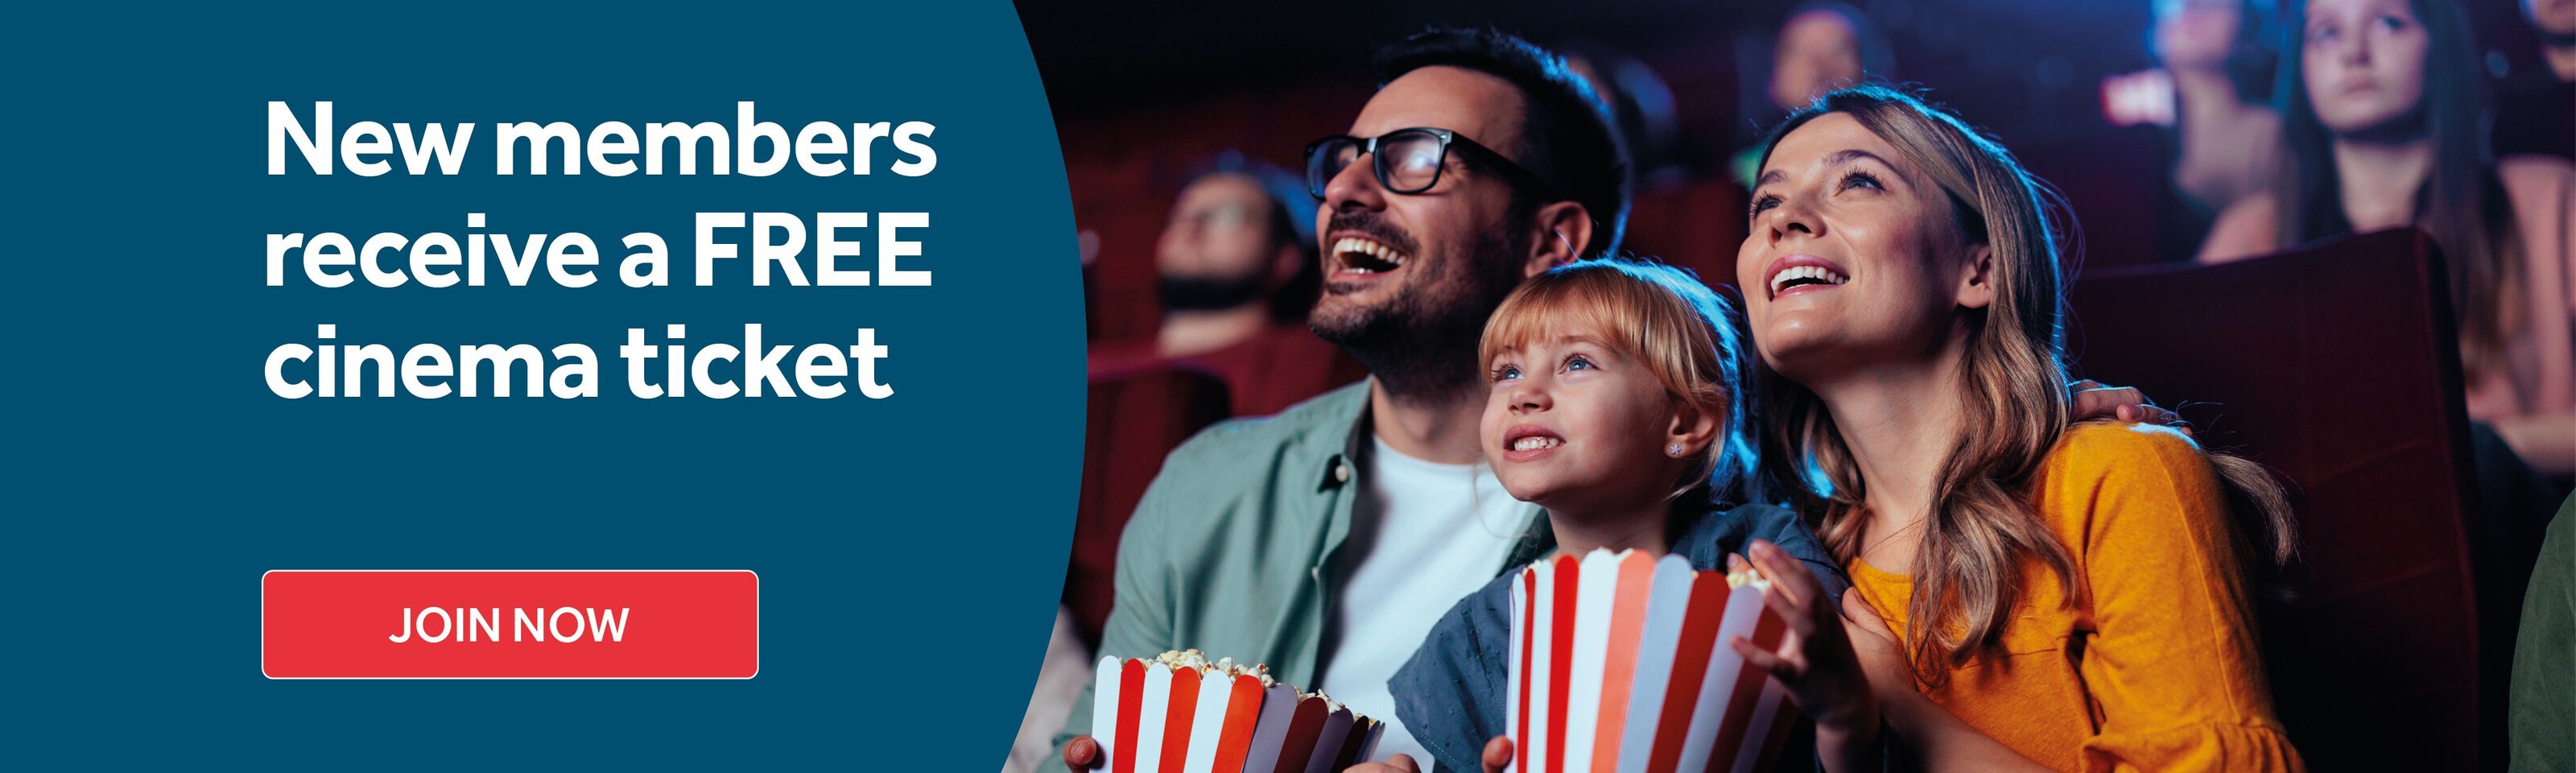 Free Cinema Ticket for new members